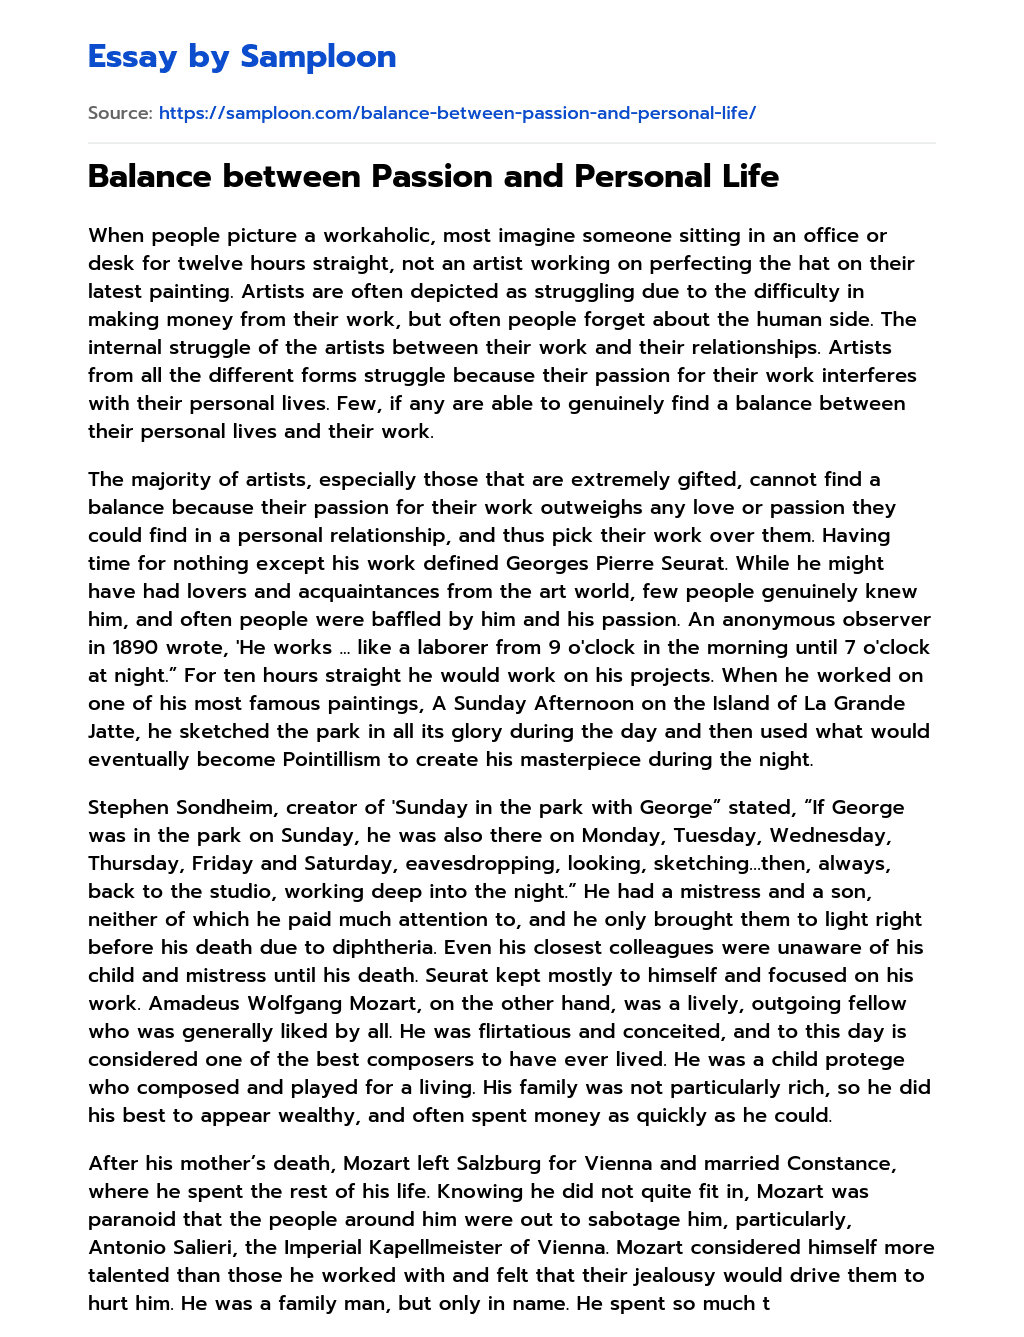 Balance between Passion and Personal Life essay